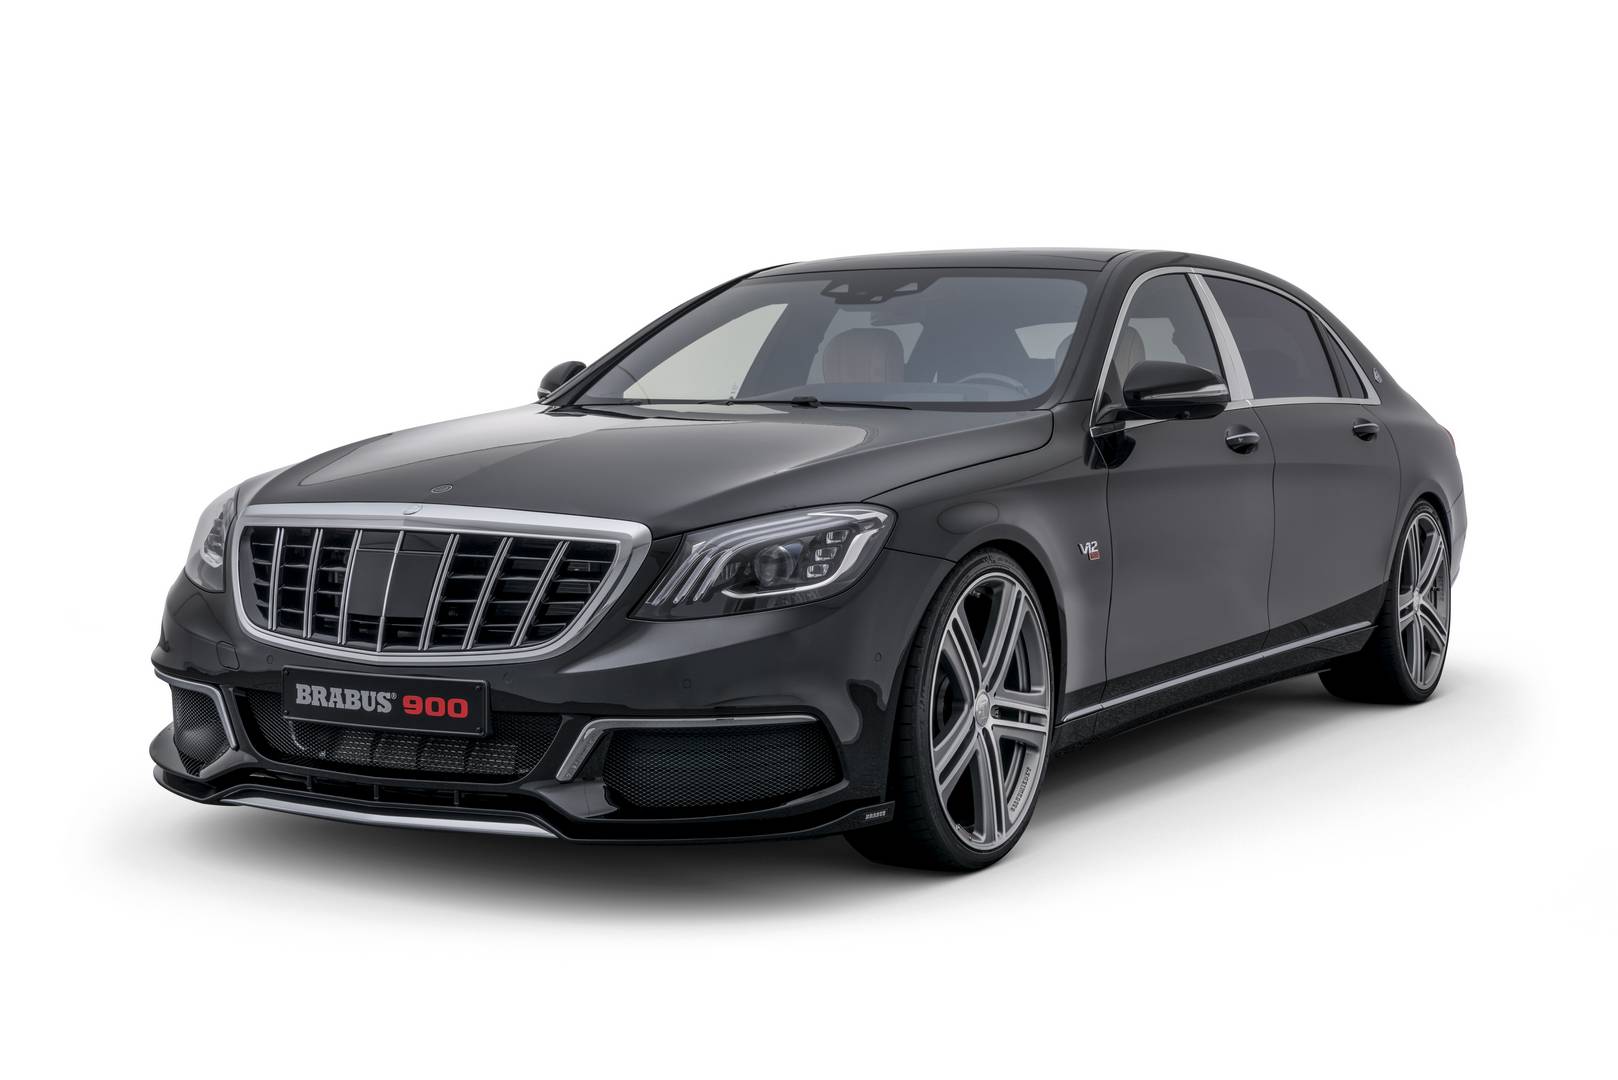 Official Brabus Rocket 900 Based on MercedesMaybach S650